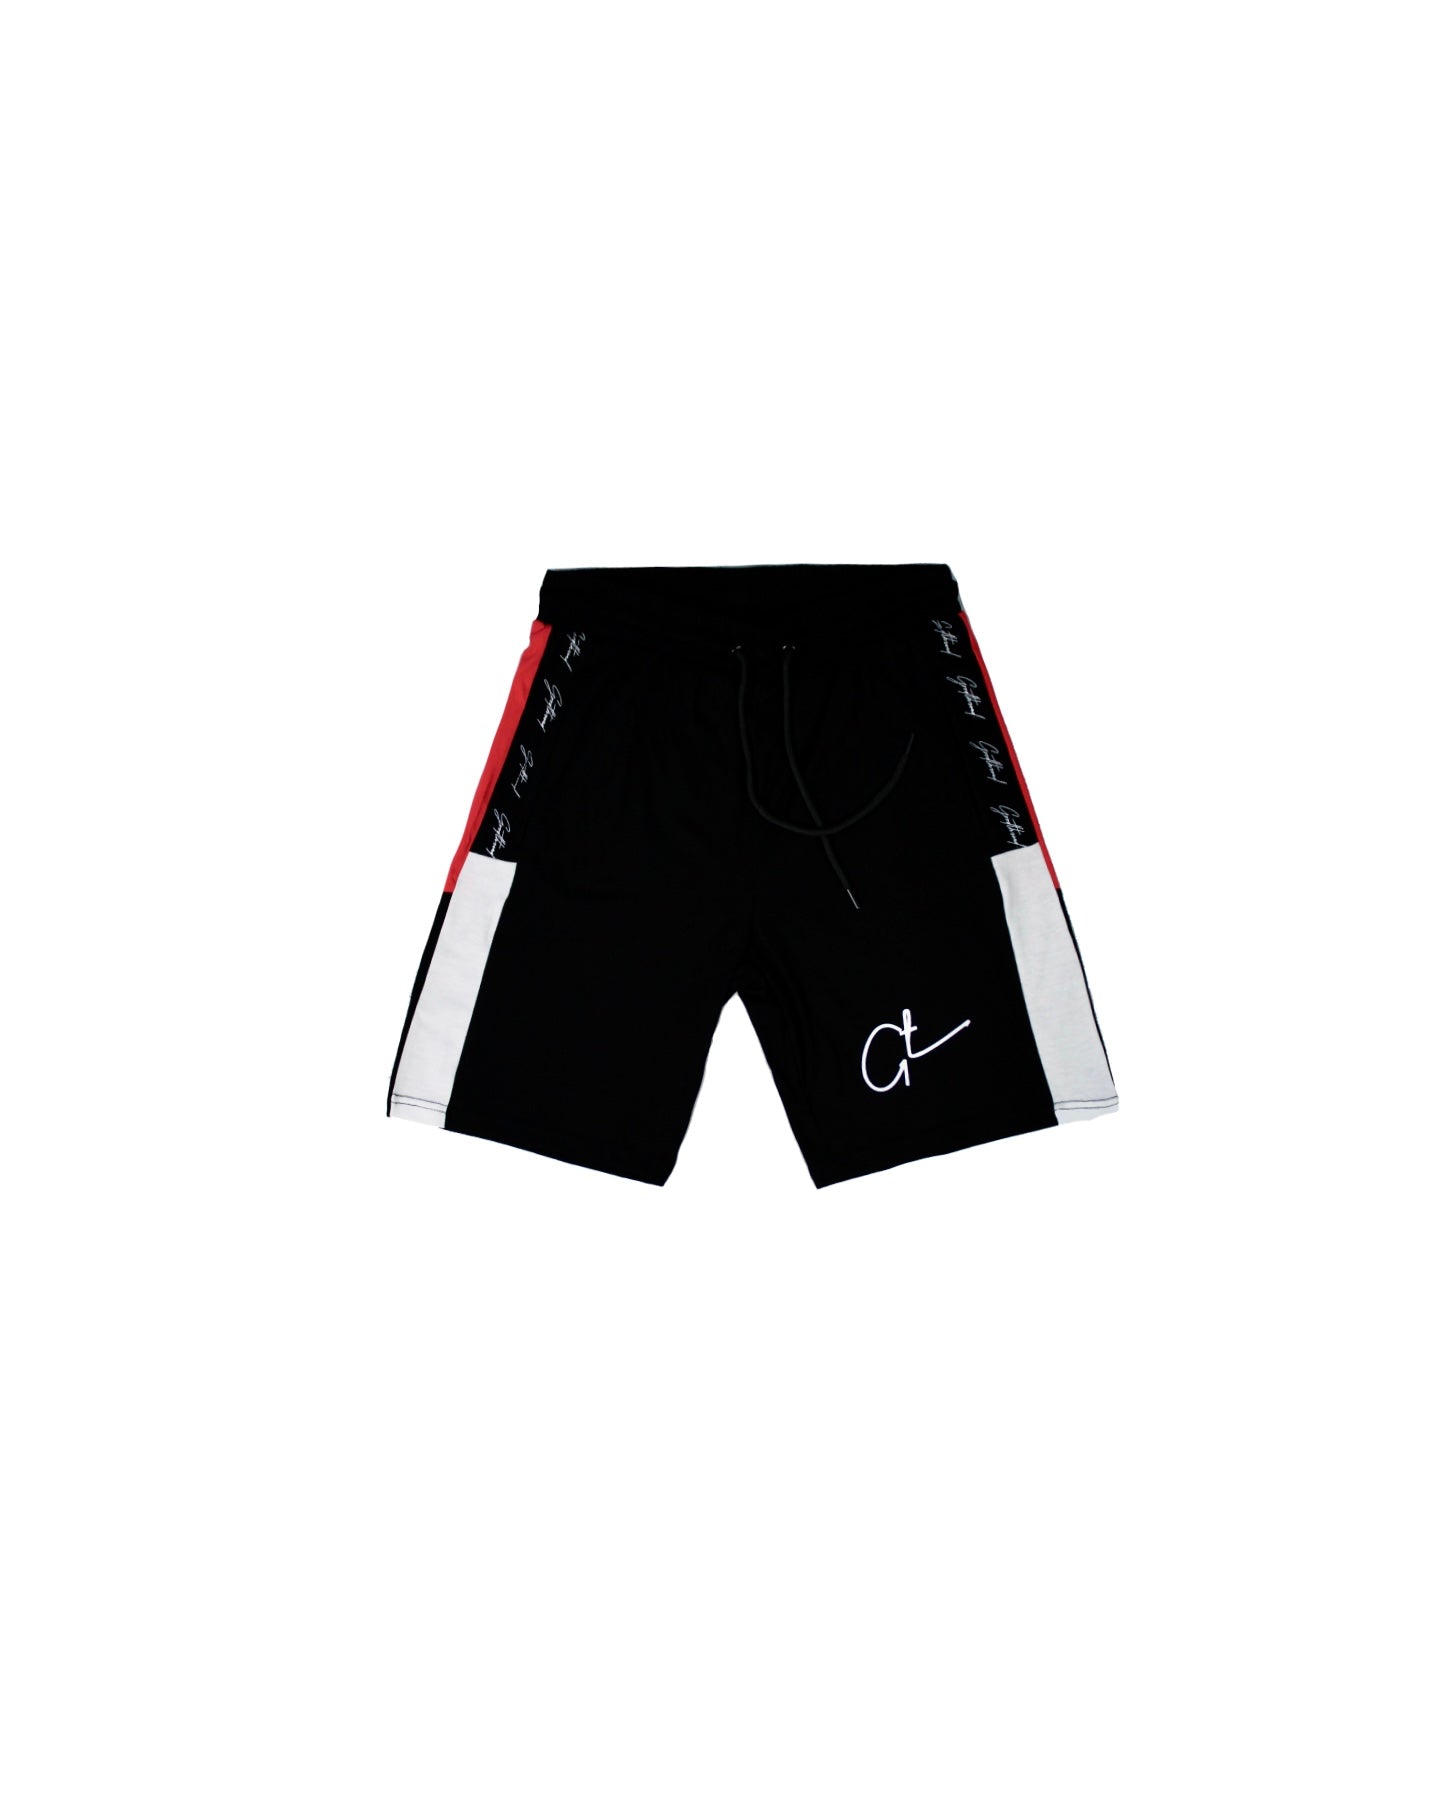 Black Red White Comfy Shorts